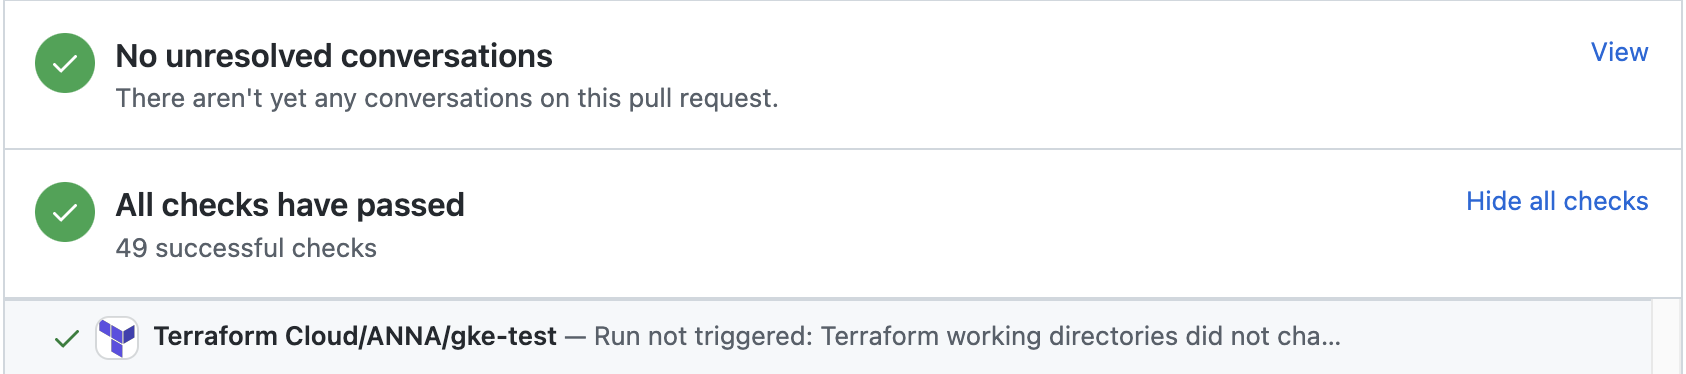 Github Actions with terraform cloud status